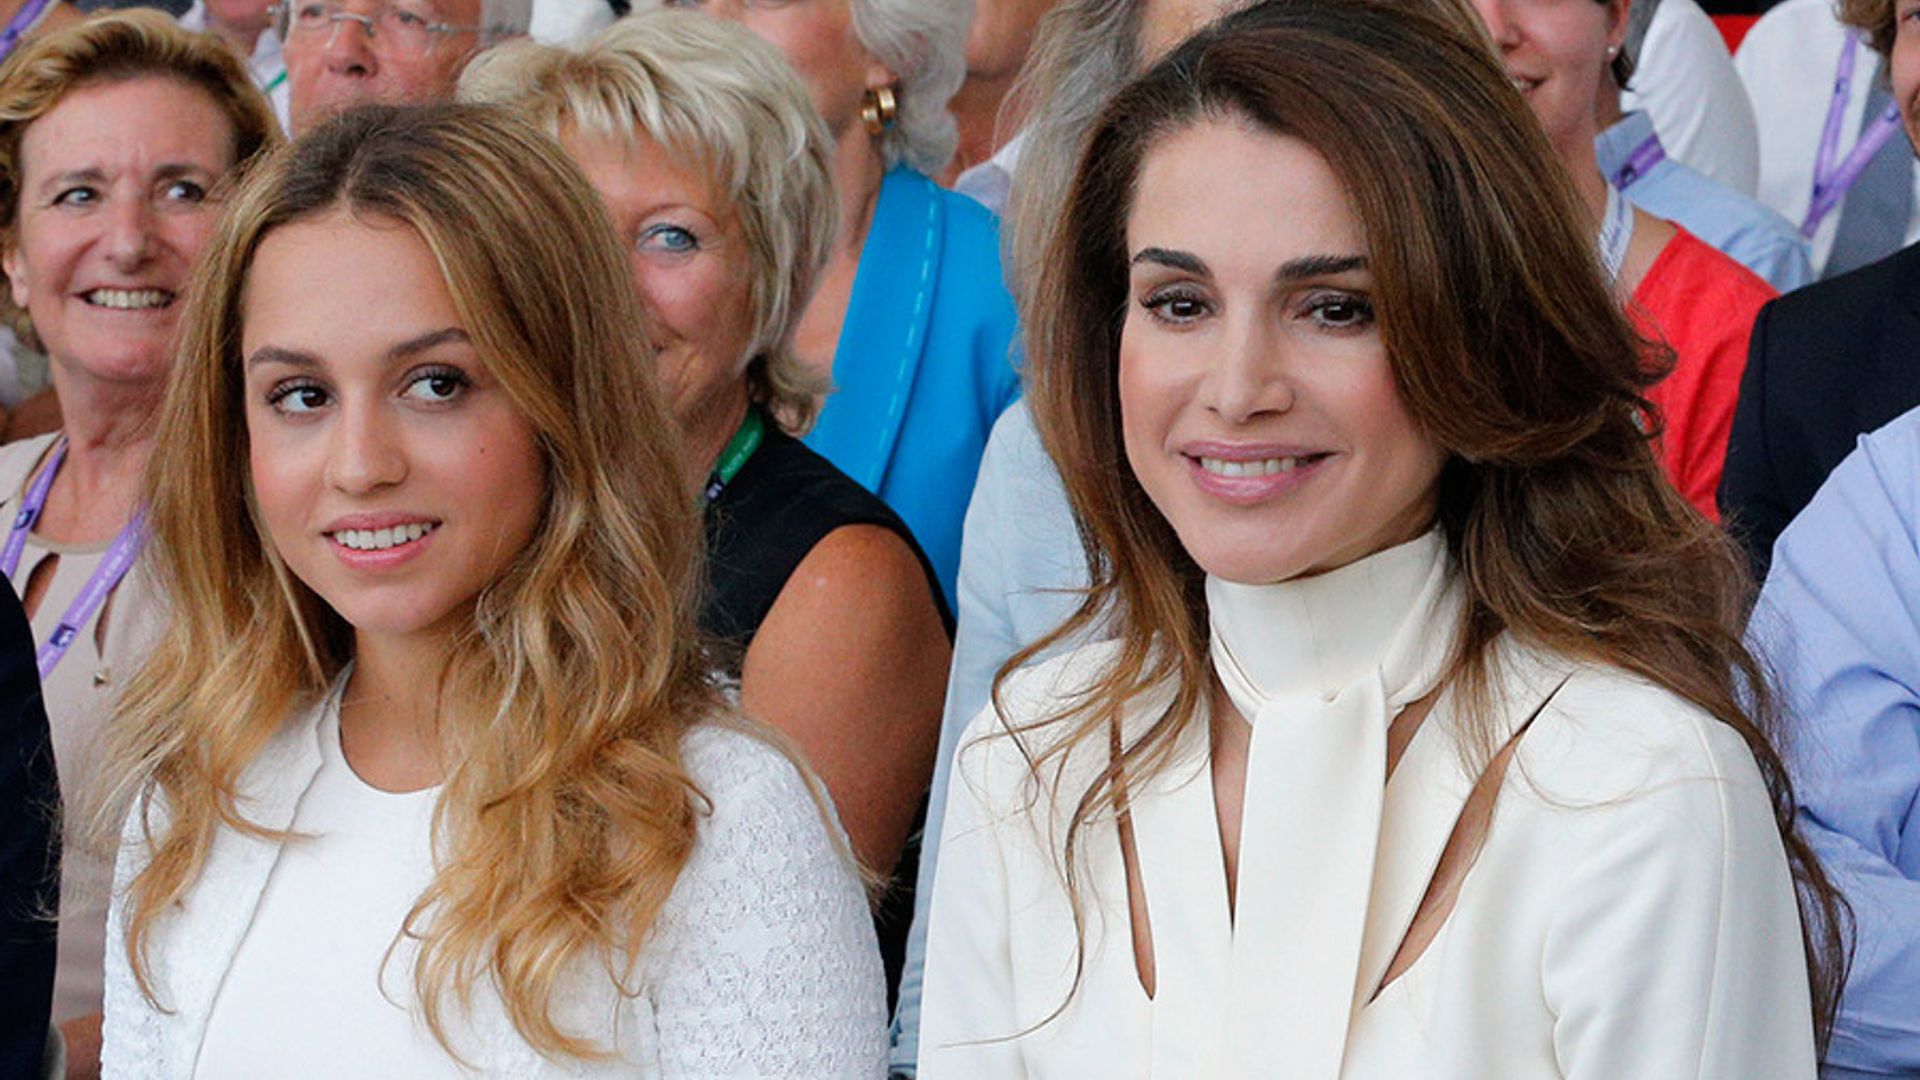 Princess Iman of Jordan: All the facts about Queen Rania's look-alike daughter